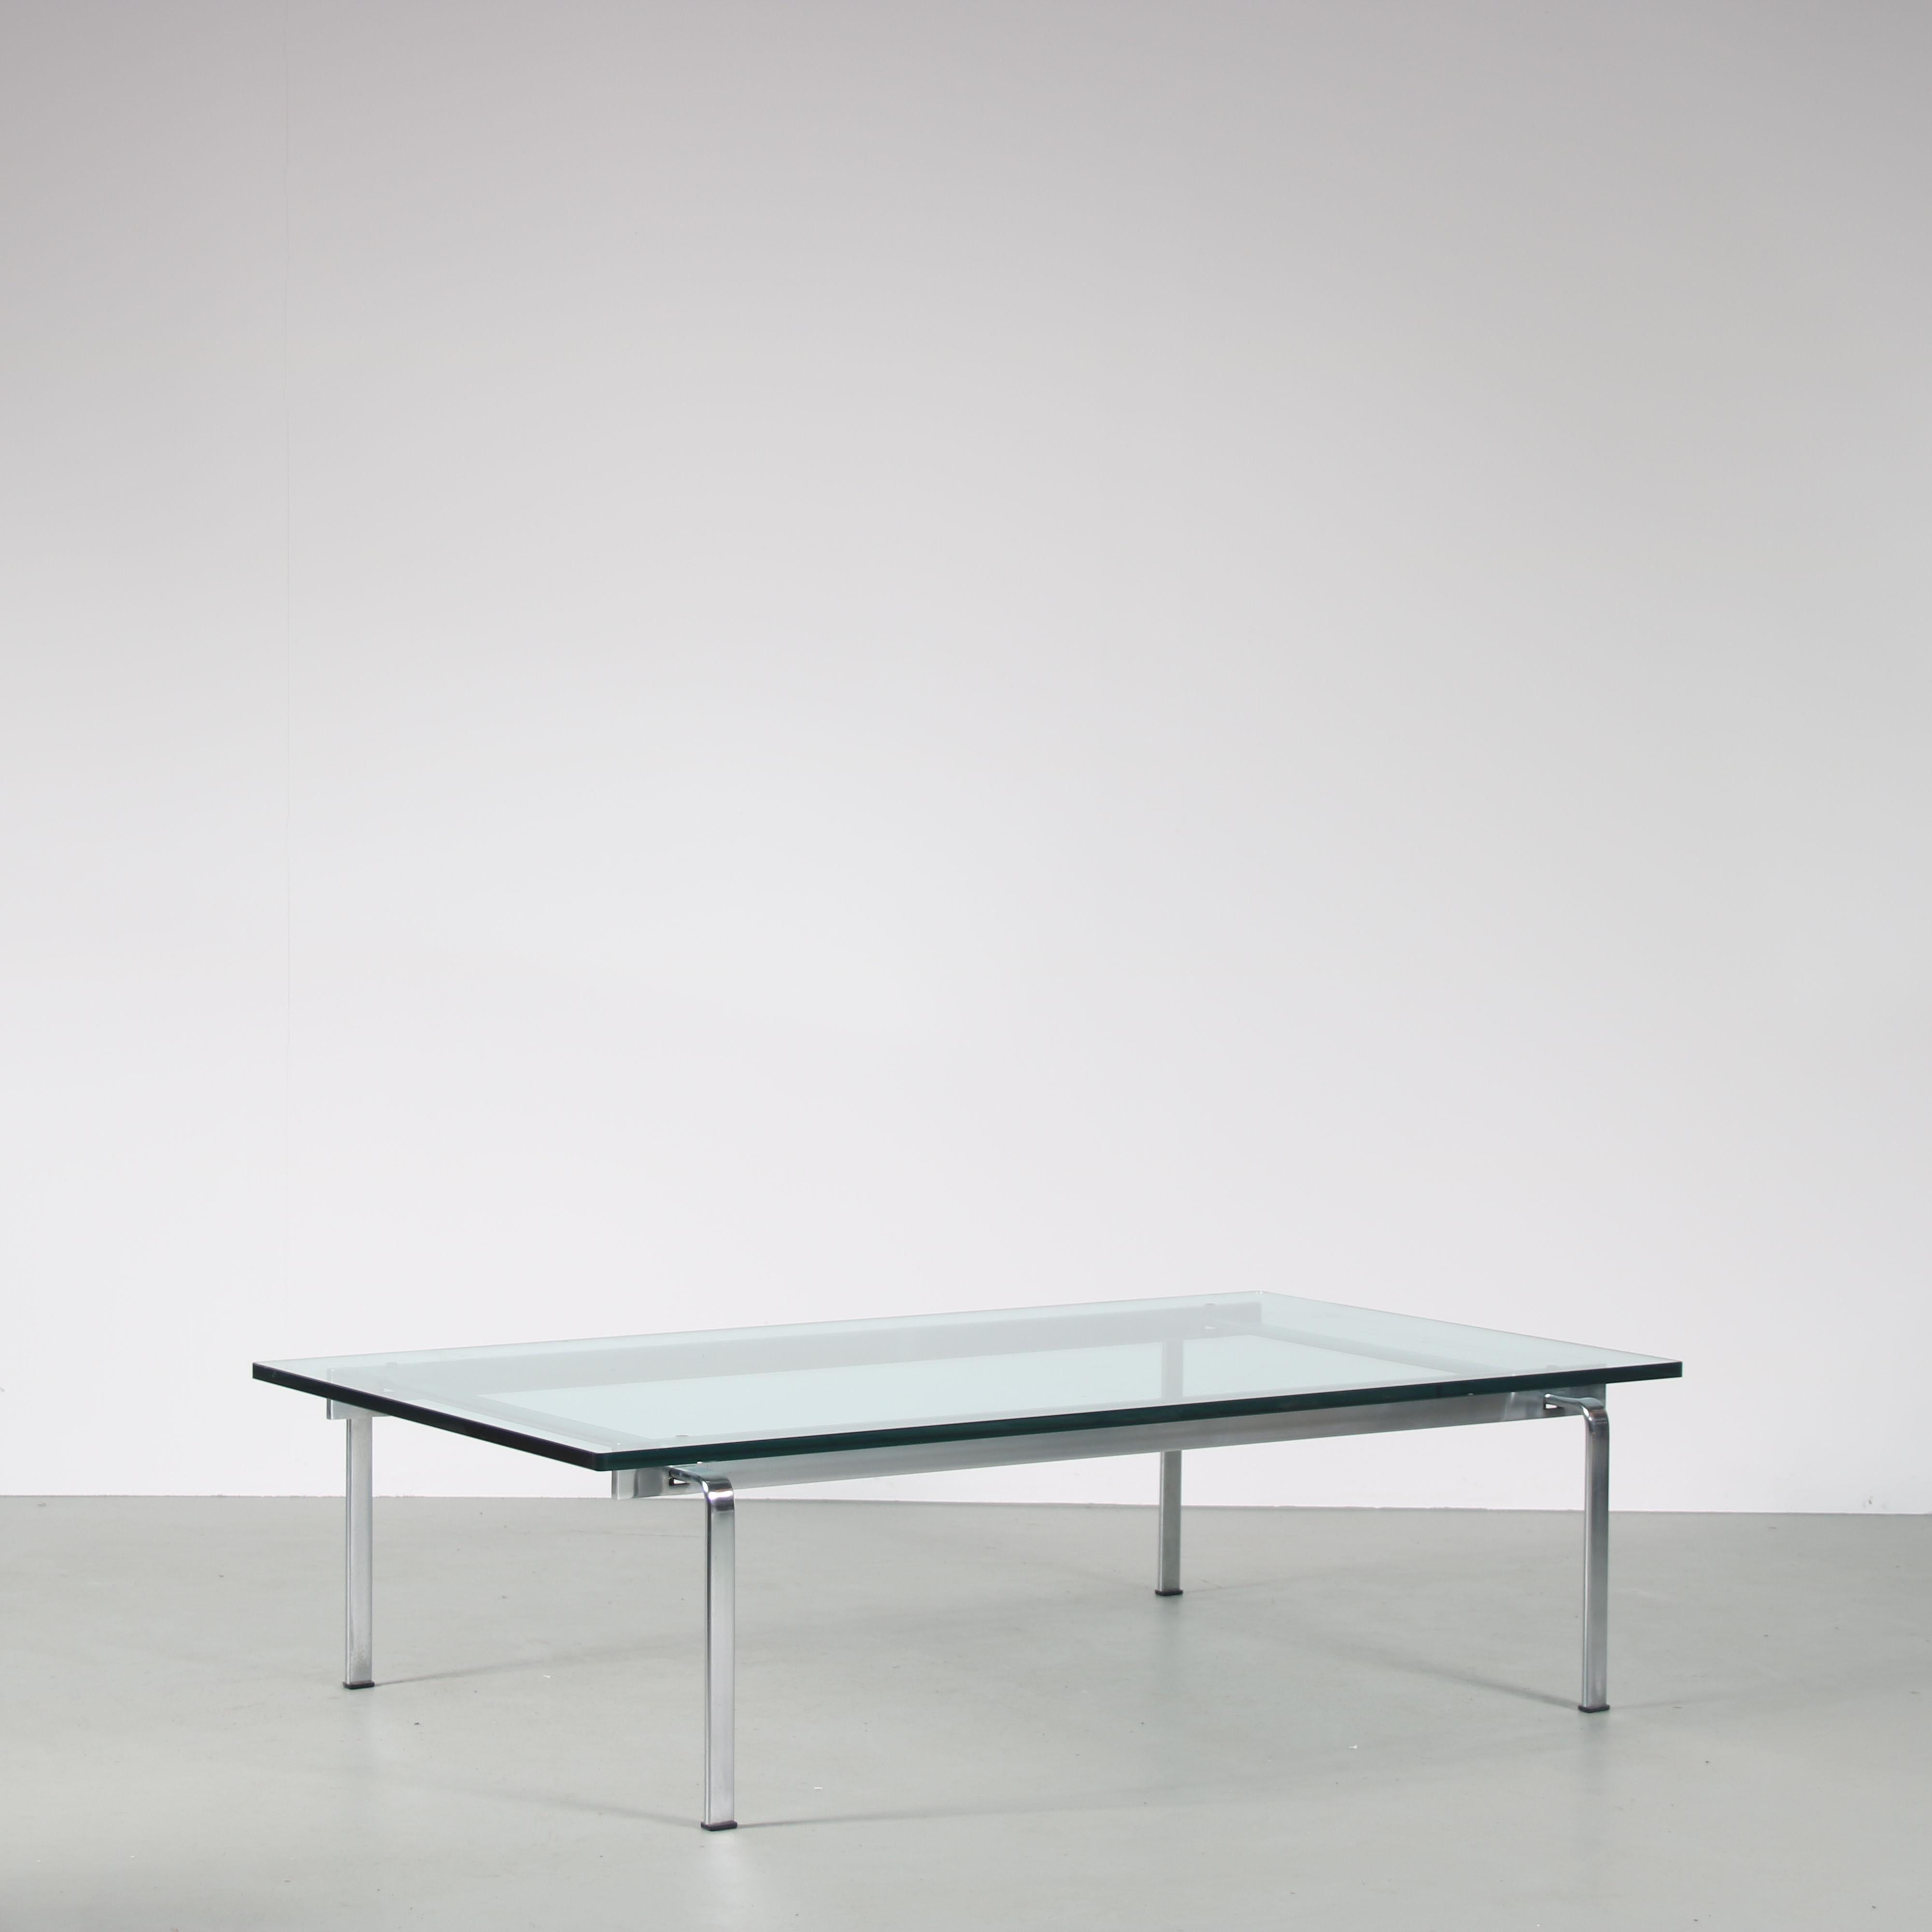 

A beautiful rectangular coffee table designed by Preben Fabricius & Jorgen Kastholm, manufactured by Kill International in Germany around 1960.

This high quality piece features a chrome plated metal base with a thick, square glass top. The